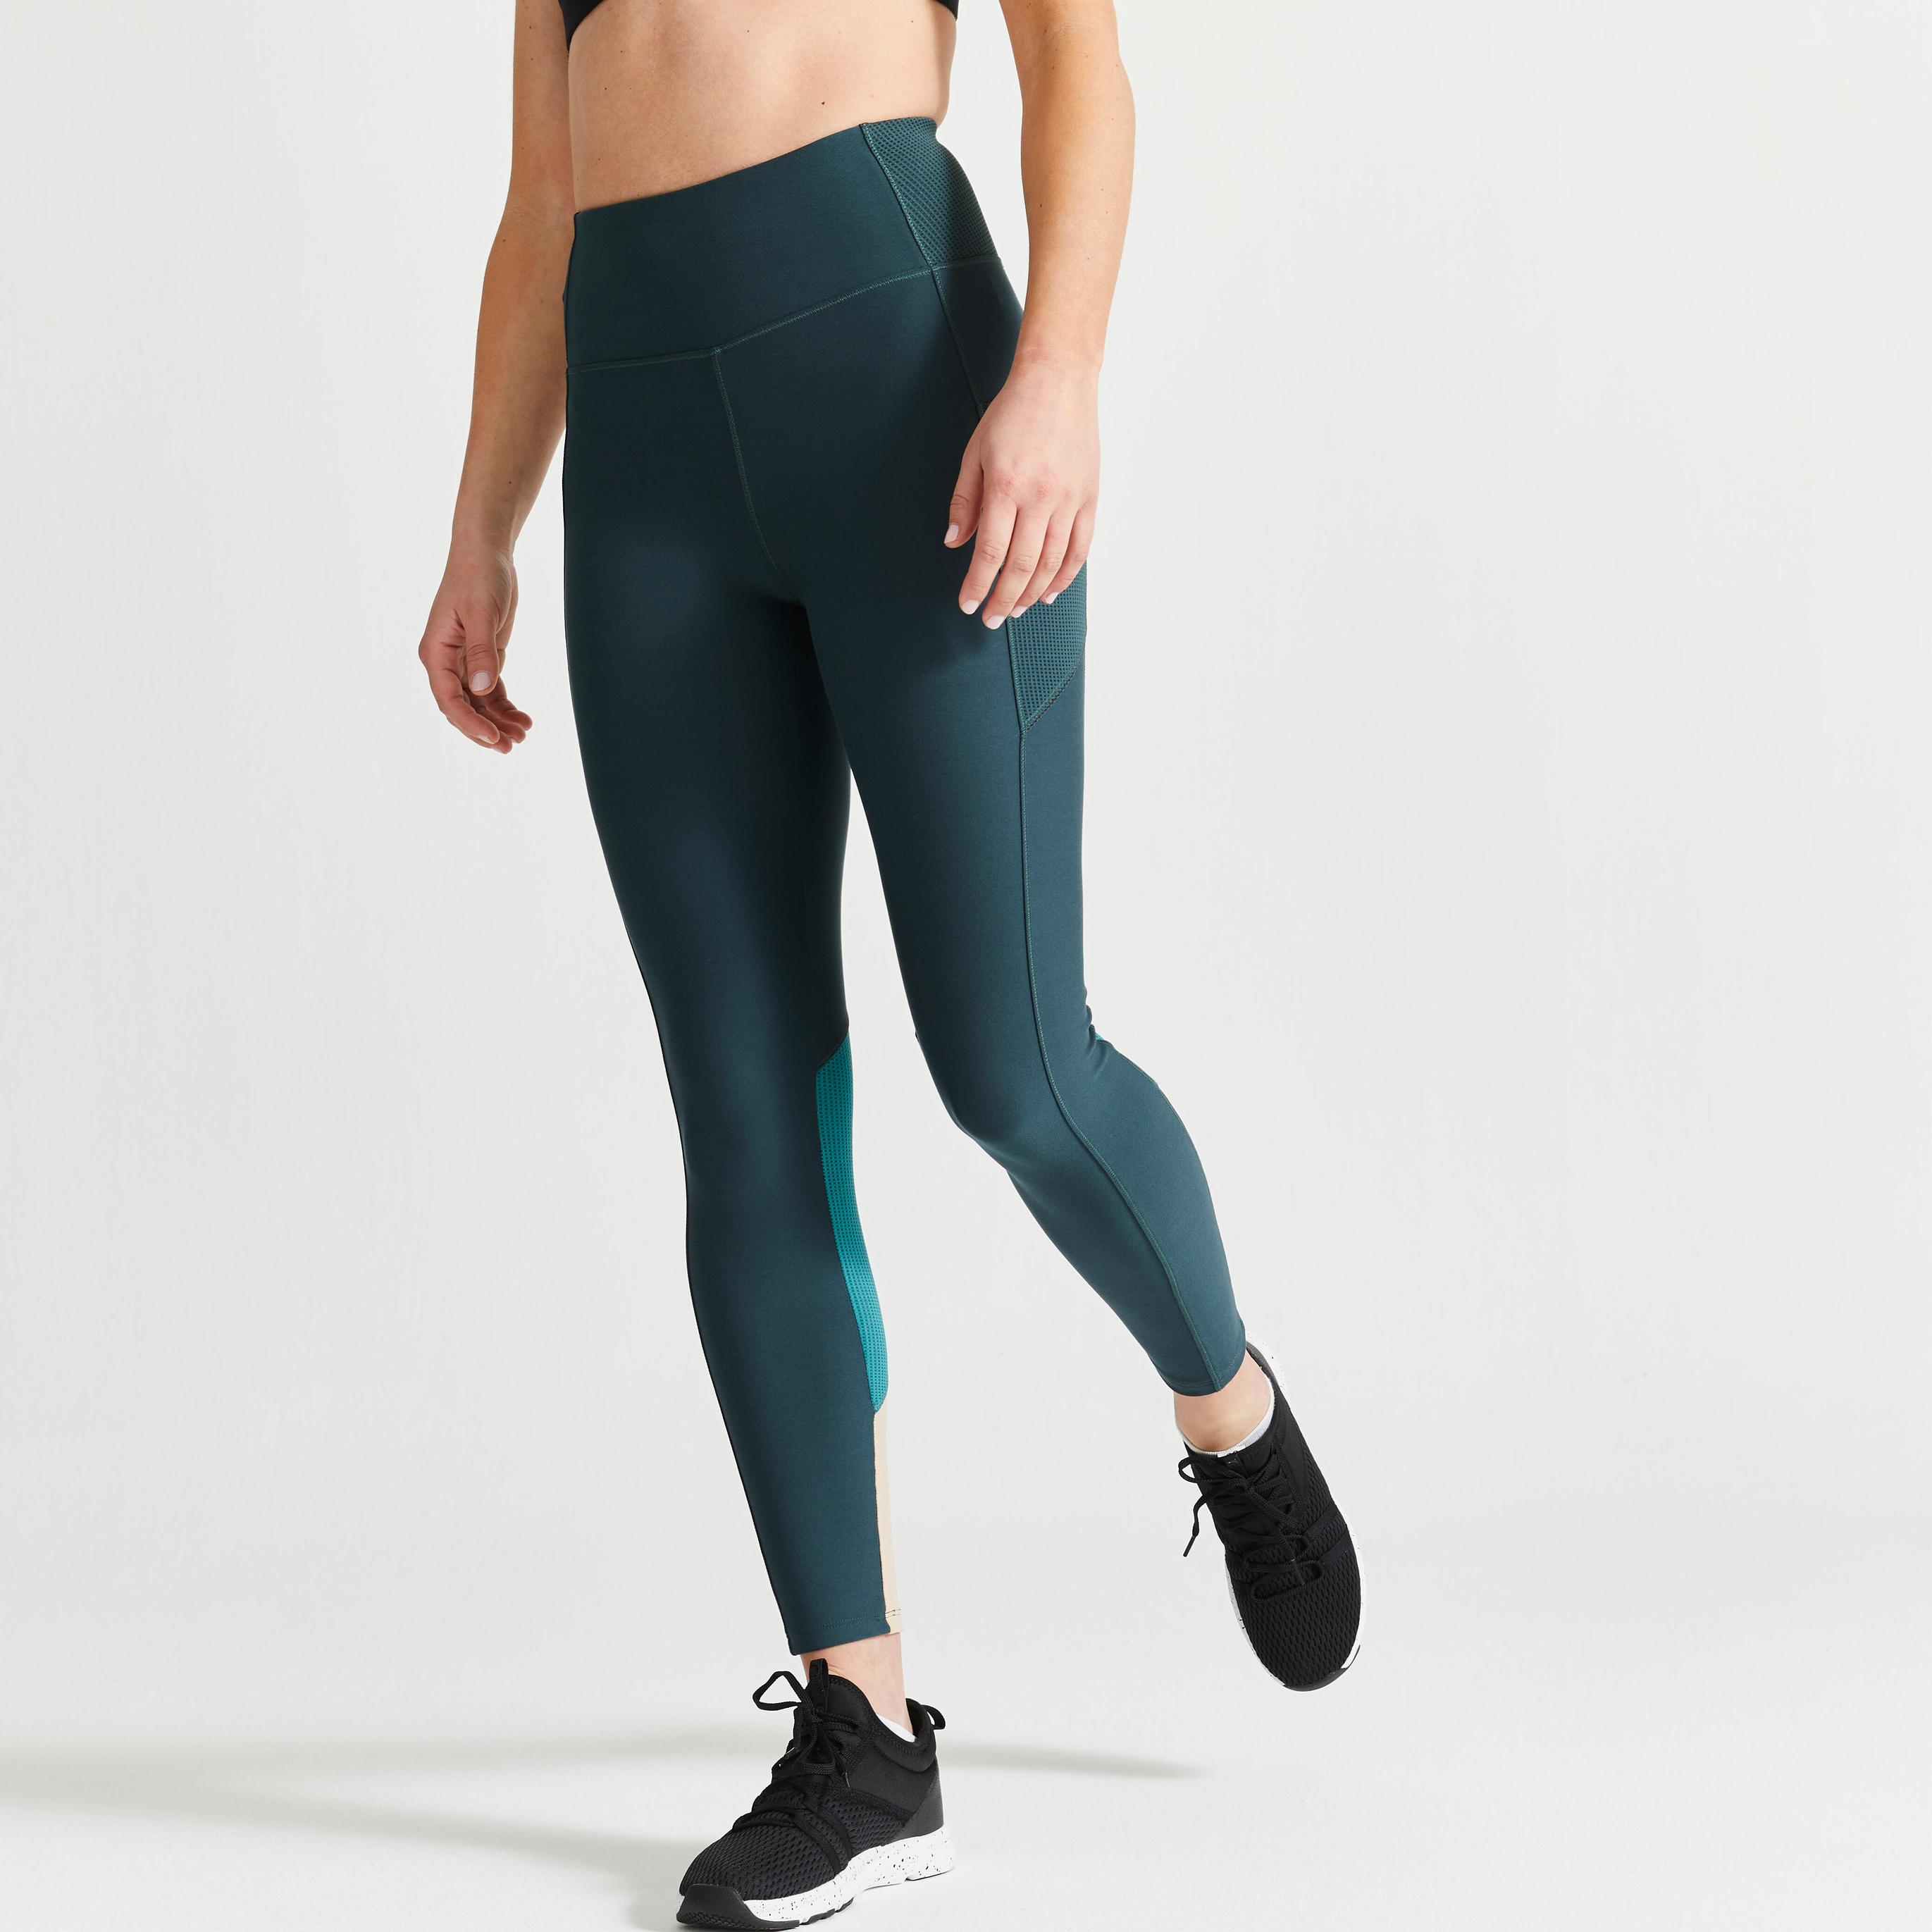 Women's Fitness Leggings with Phone Pocket - Green offers at S$ 15.9 in Decathlon